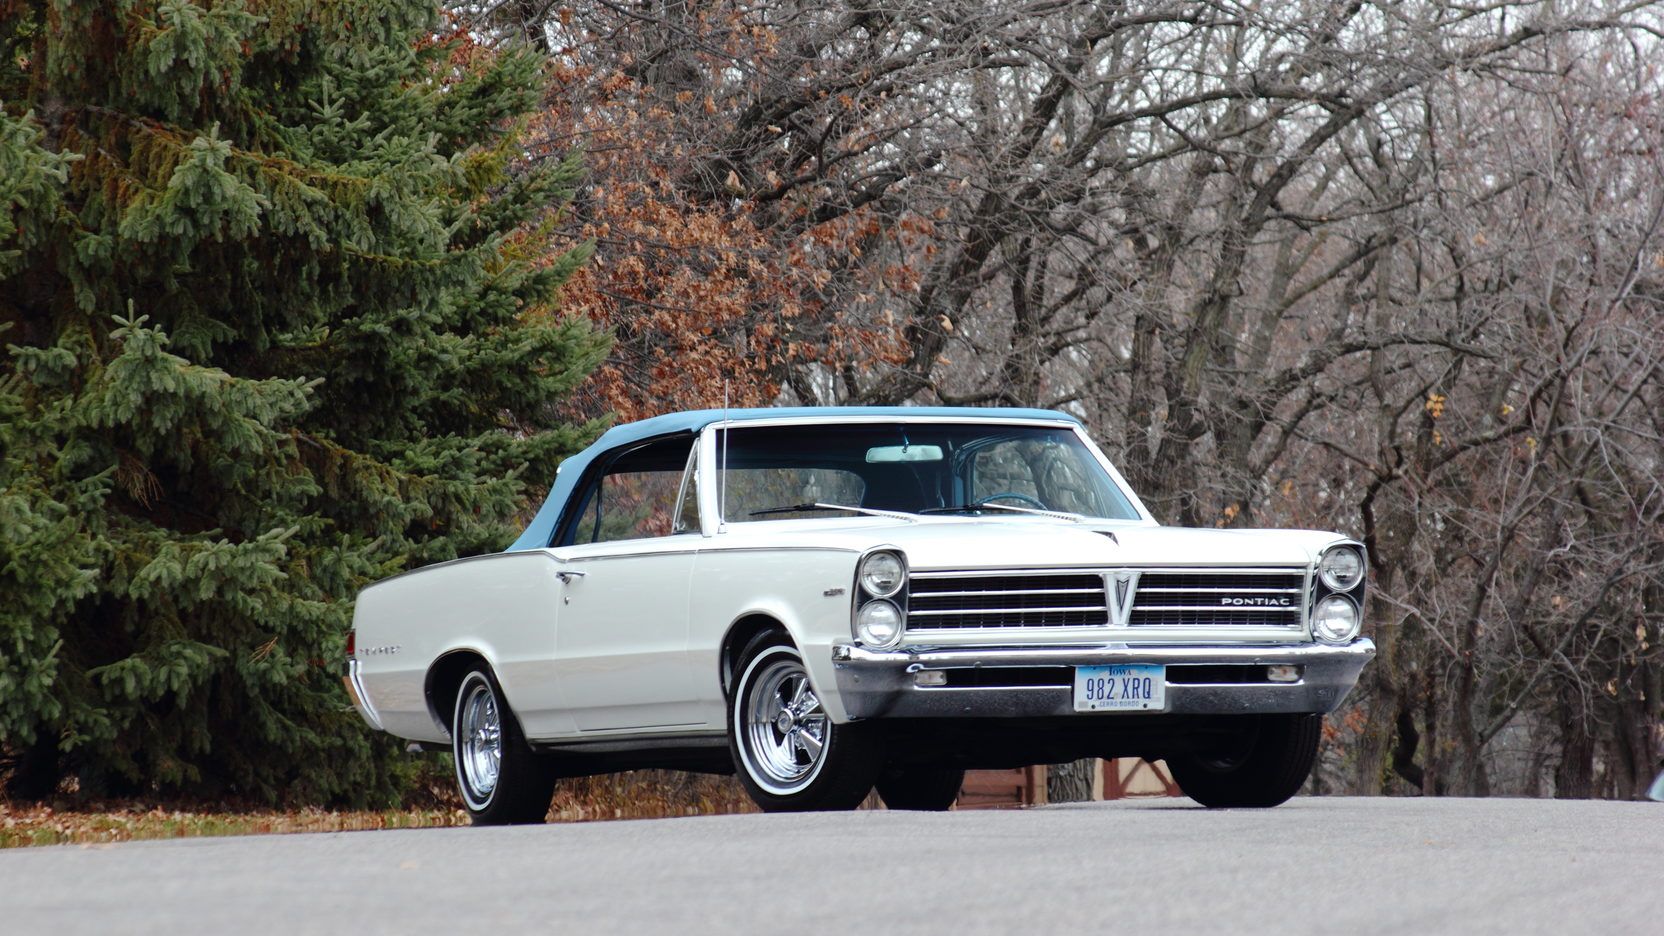 1965 Pontiac Tempest convertible 326, white, candy blue rooftop, front